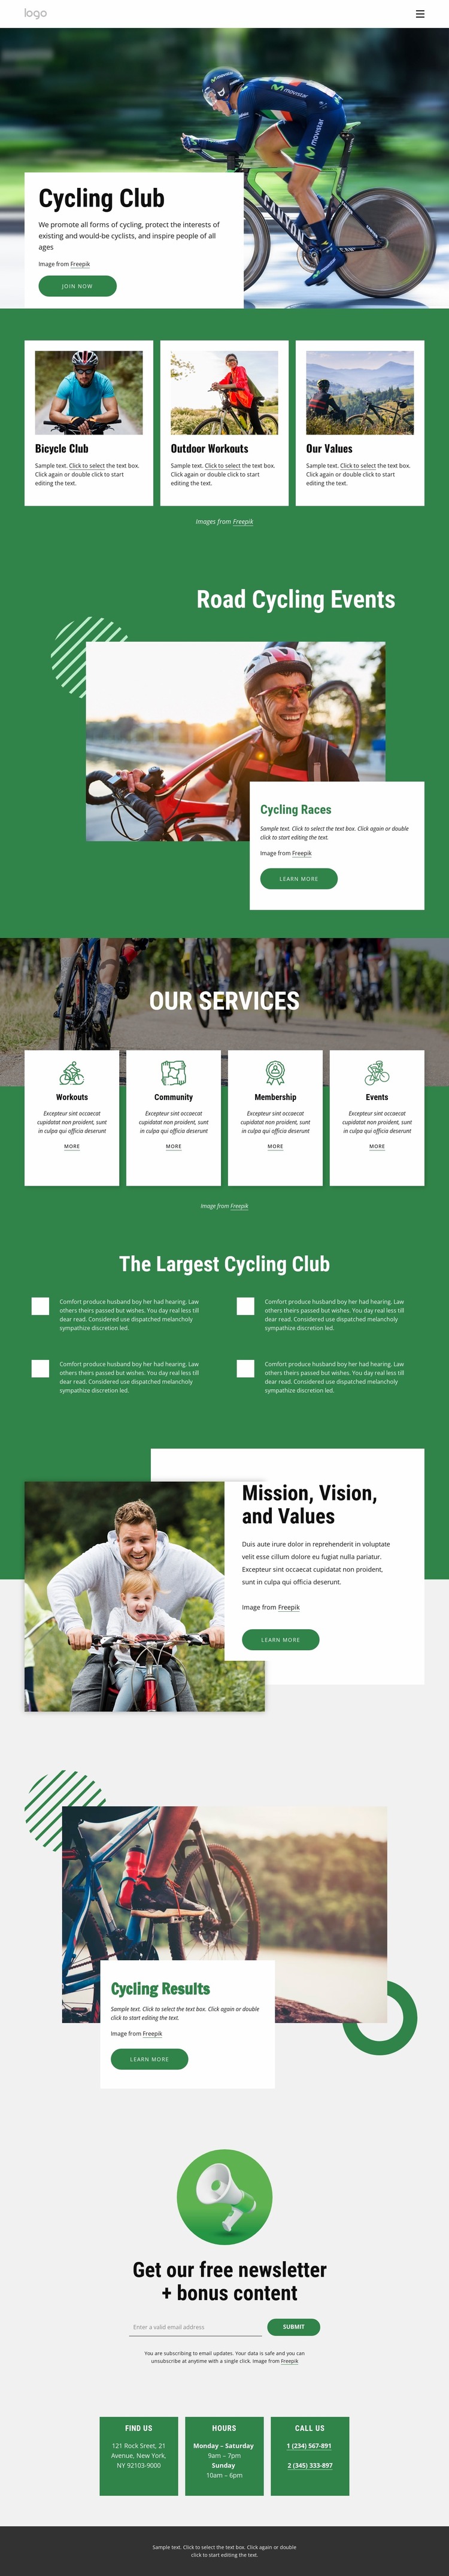 Welcome to cycling club Website Mockup